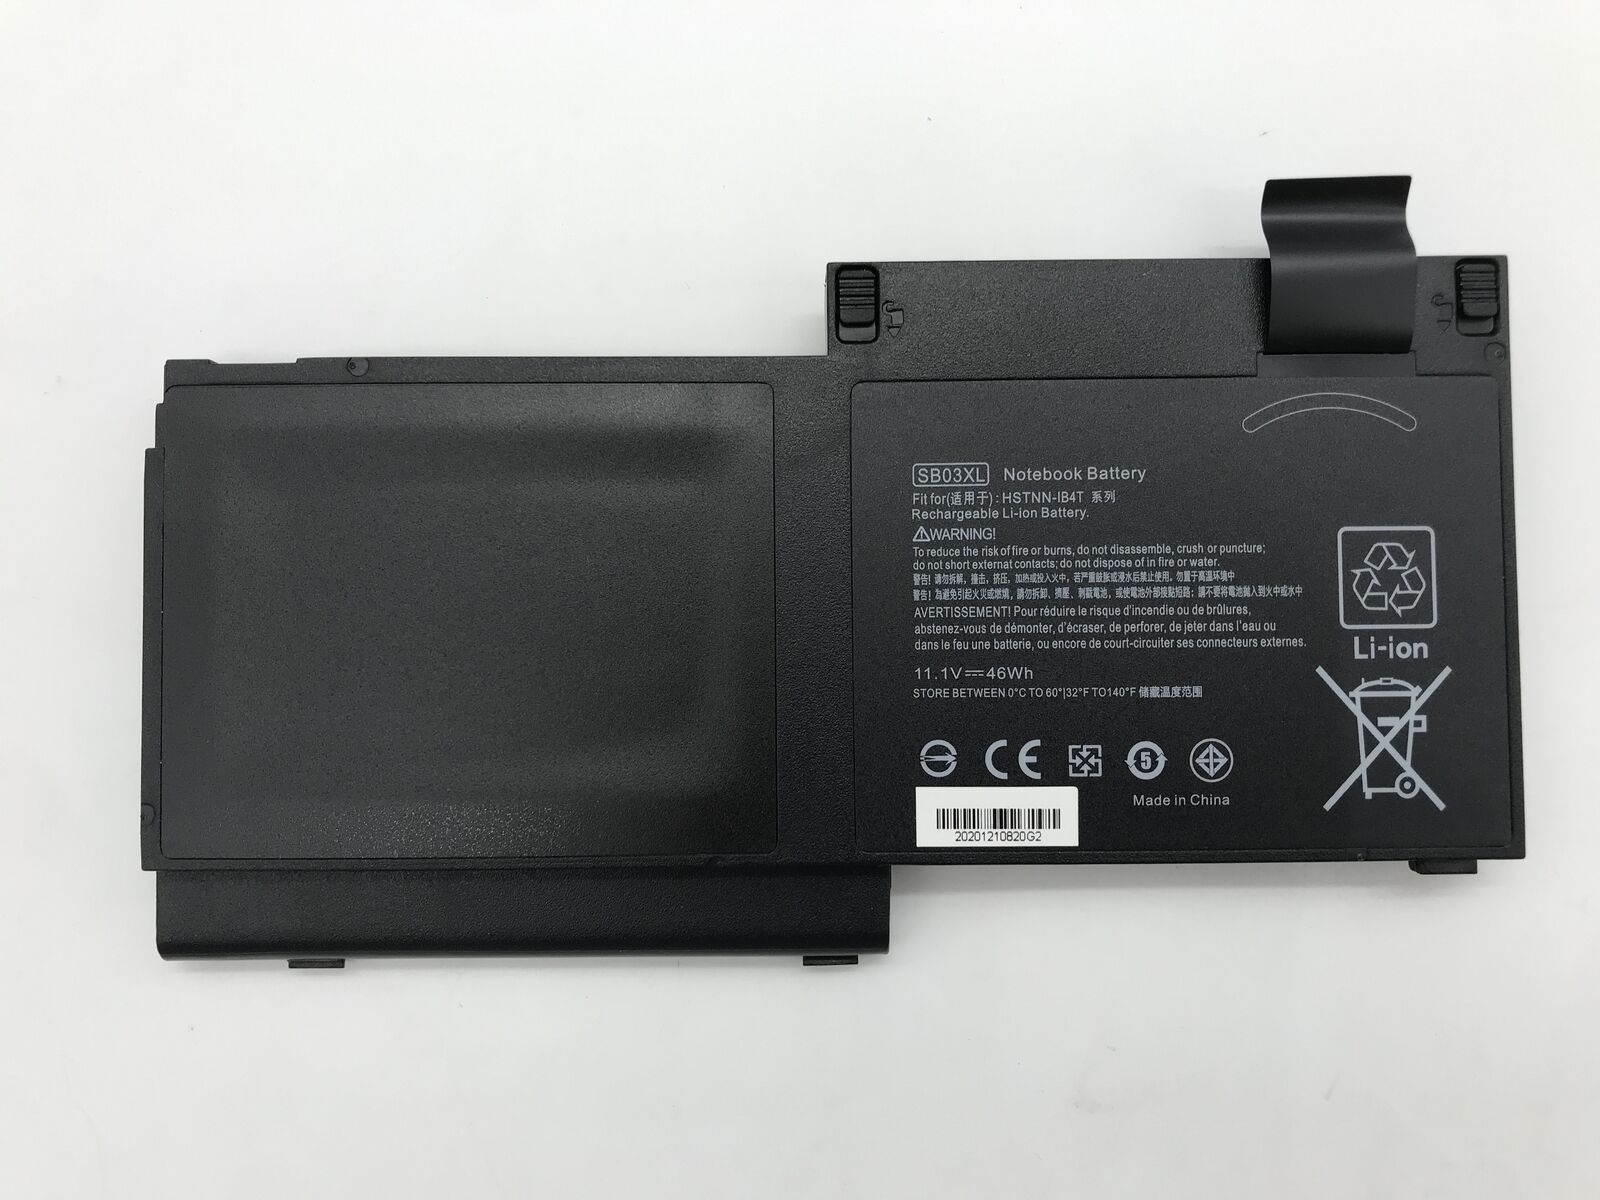 Replacement Battery for HP Elitebook 820 G1 G2 720 11.25V 46Wh SB03XL SB03046XL